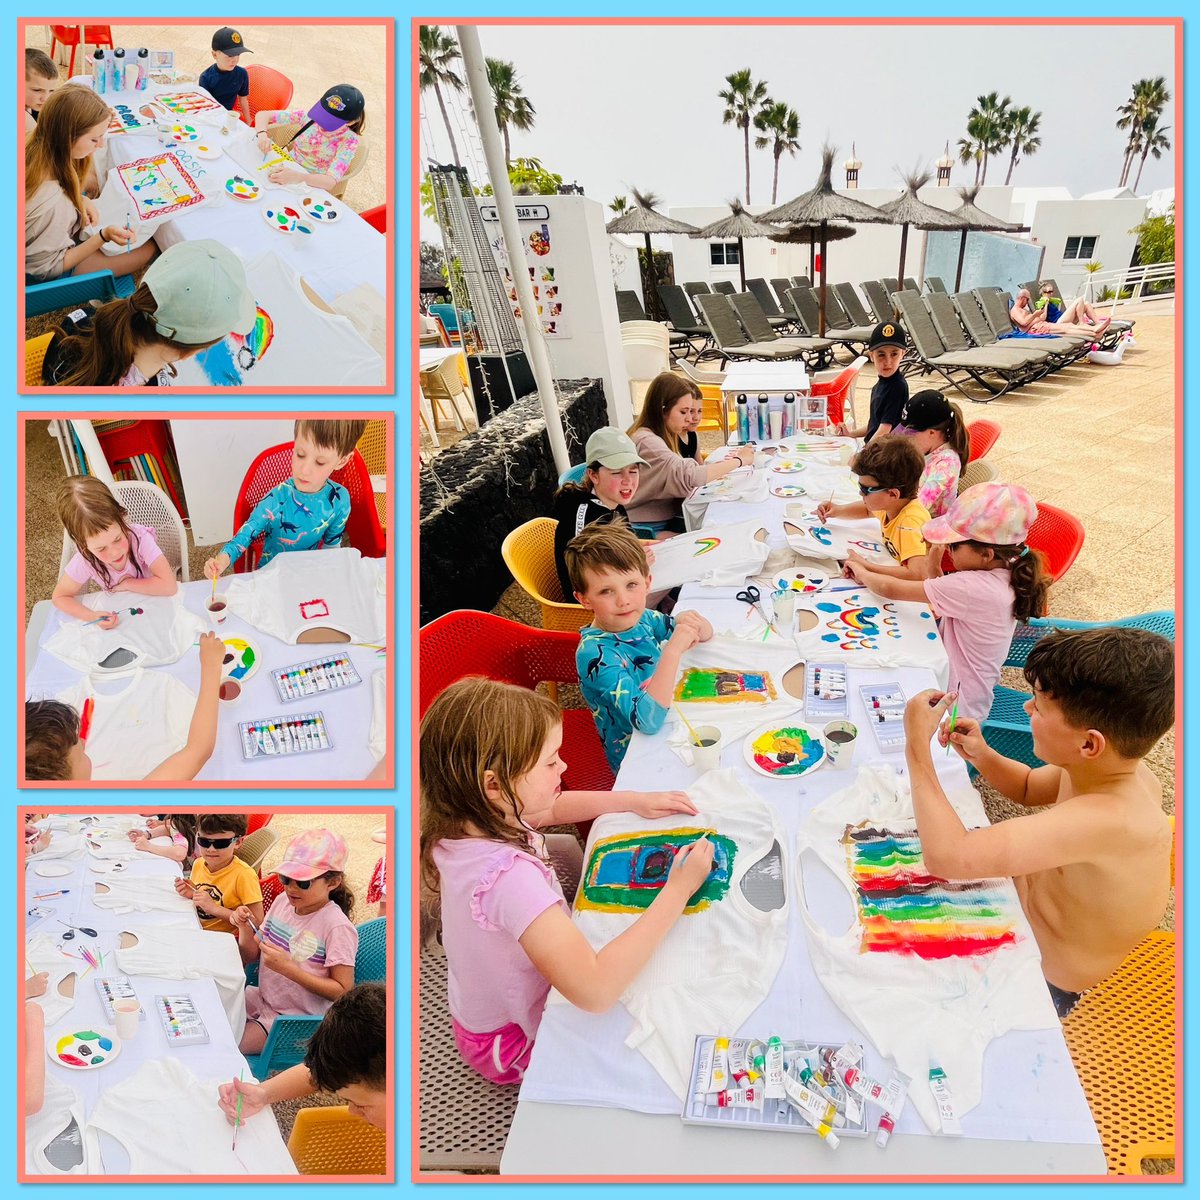 T-Shirt painting at #jardinesdelsol 🌈 Raising funds for @wearewaterfoundation 💧💧💧#holiday #painting #paintingoftheday #colour #happychildren #activitiesforkids #charityevent #colourfull #memories #lanzarote #canaryislands @JhansenML @zoiladosil